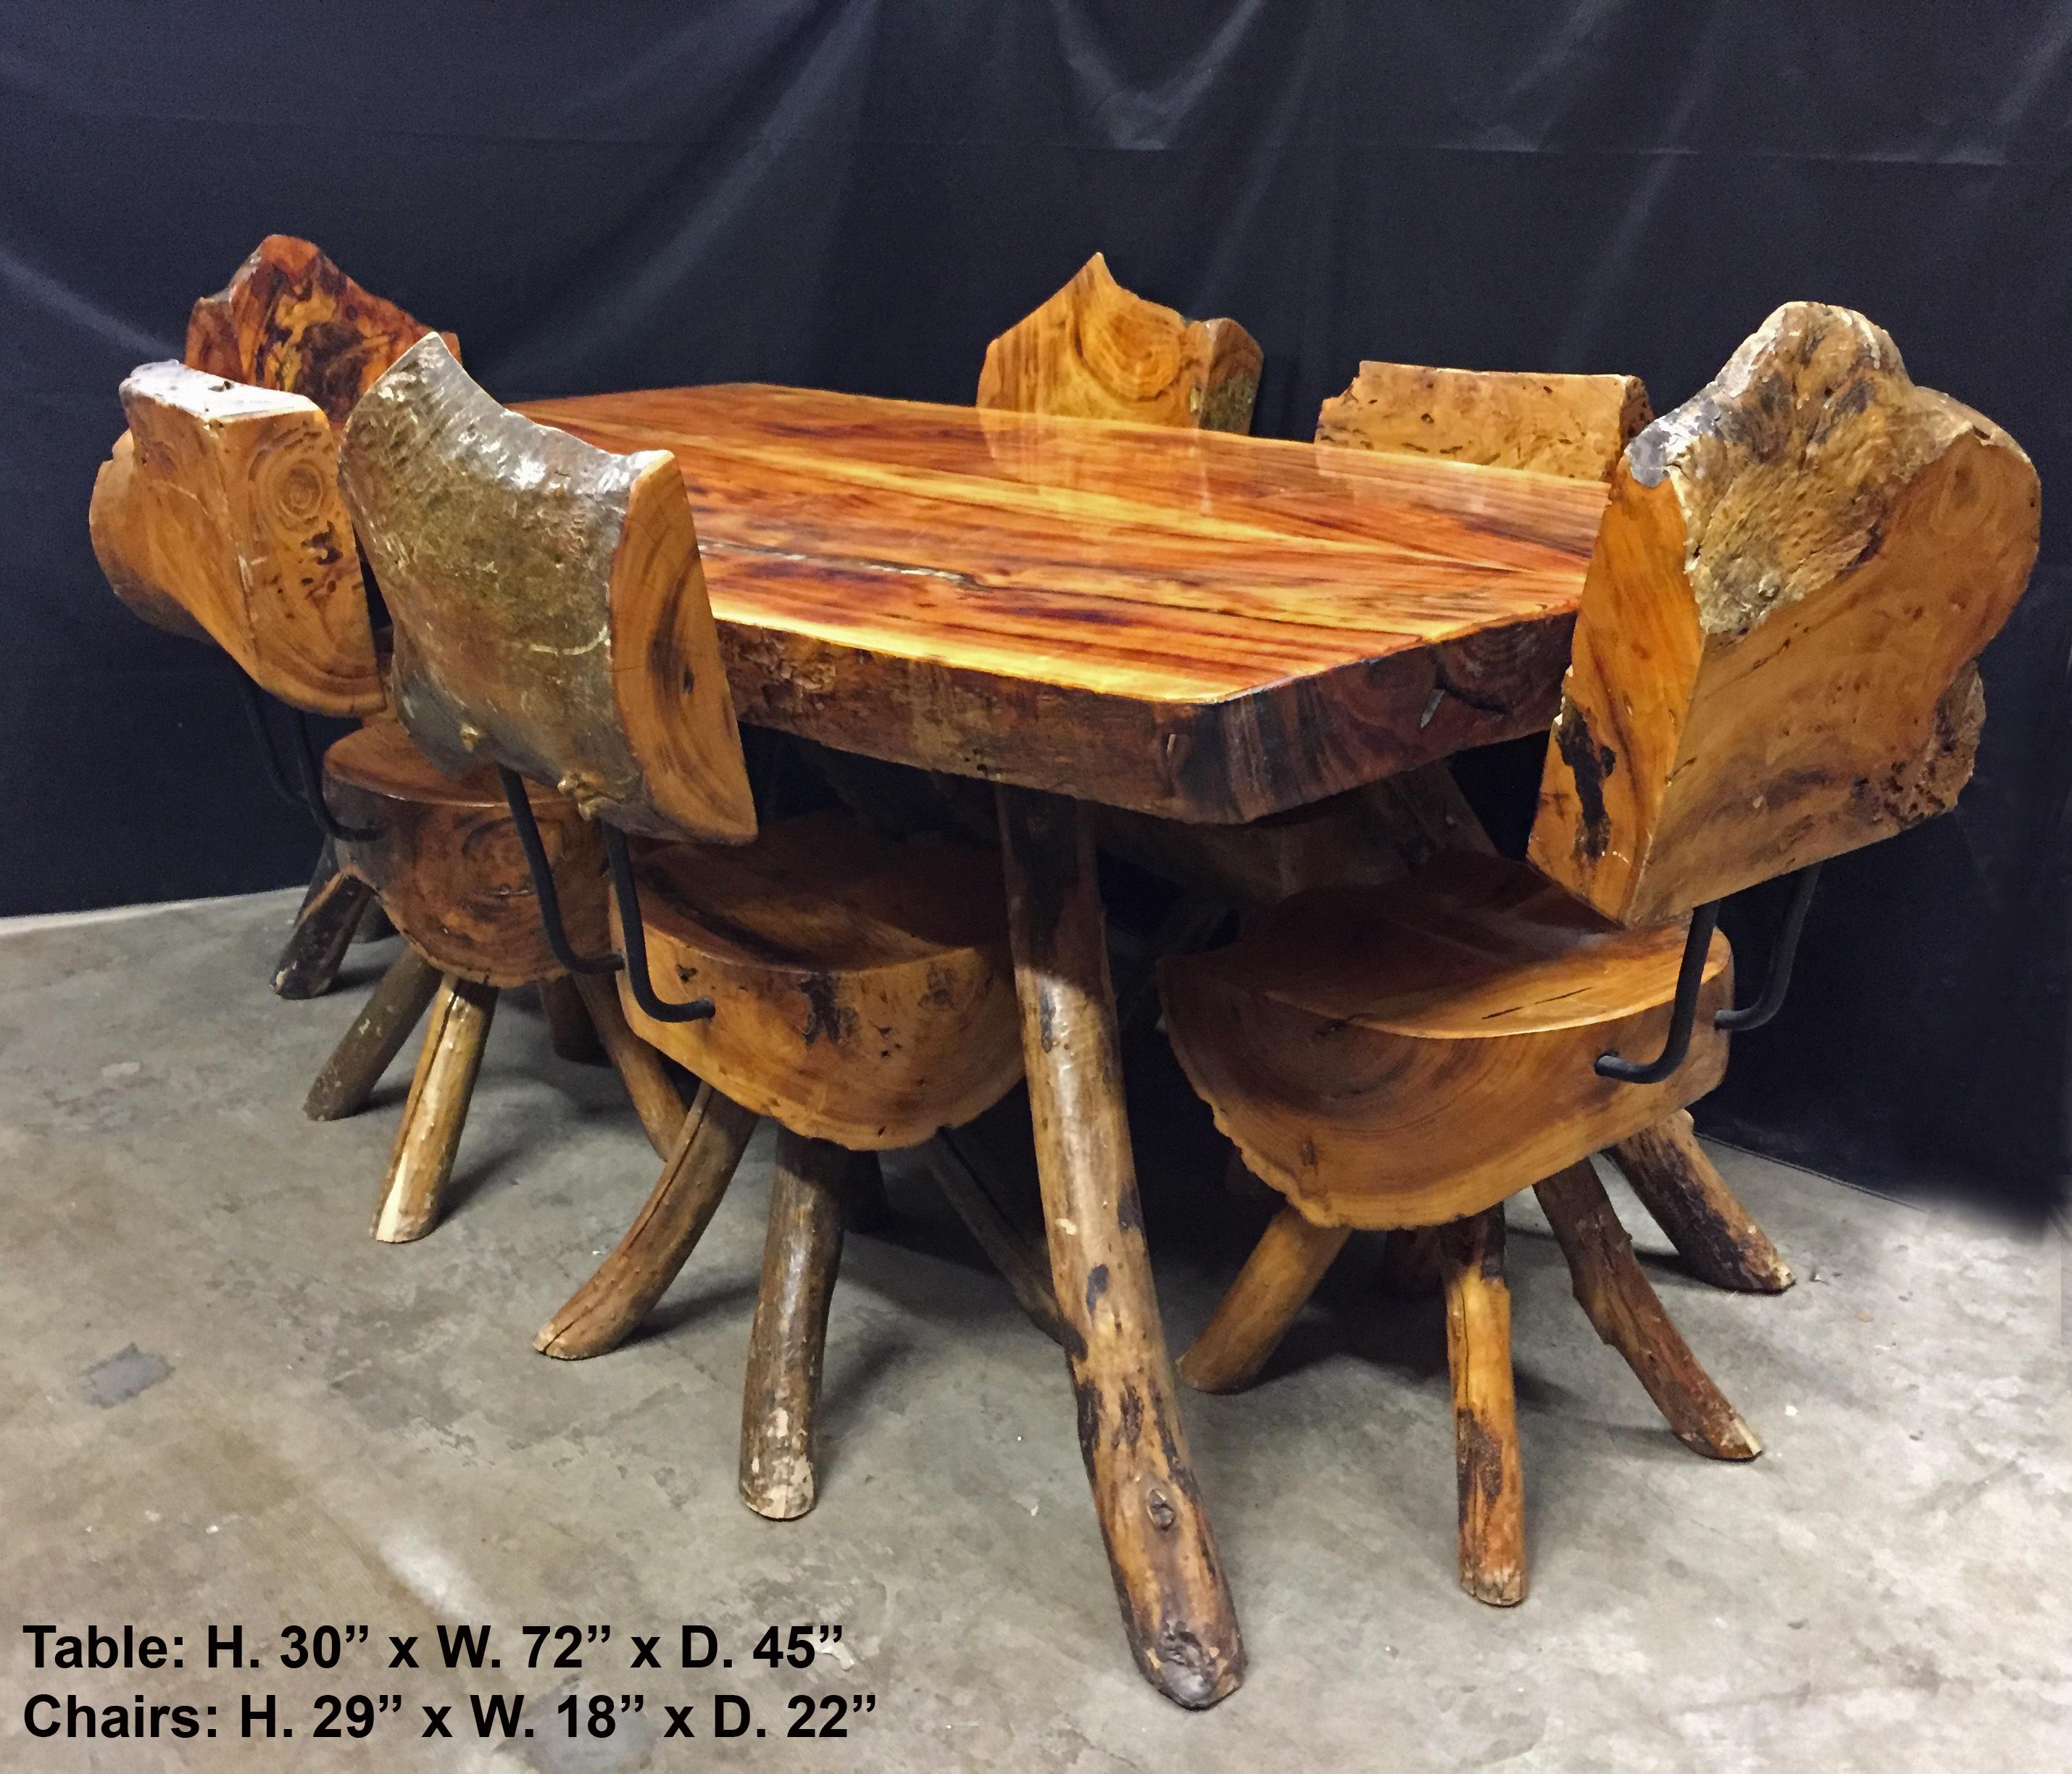 Lovely modern style carved exotic wood seven piece dining set with mother of pearl inlay.
Each piece is cut from an exotic tree trunk and later inlaid with mother of pearl. The tabletop is cut from a very large singular piece of exotic wood. The